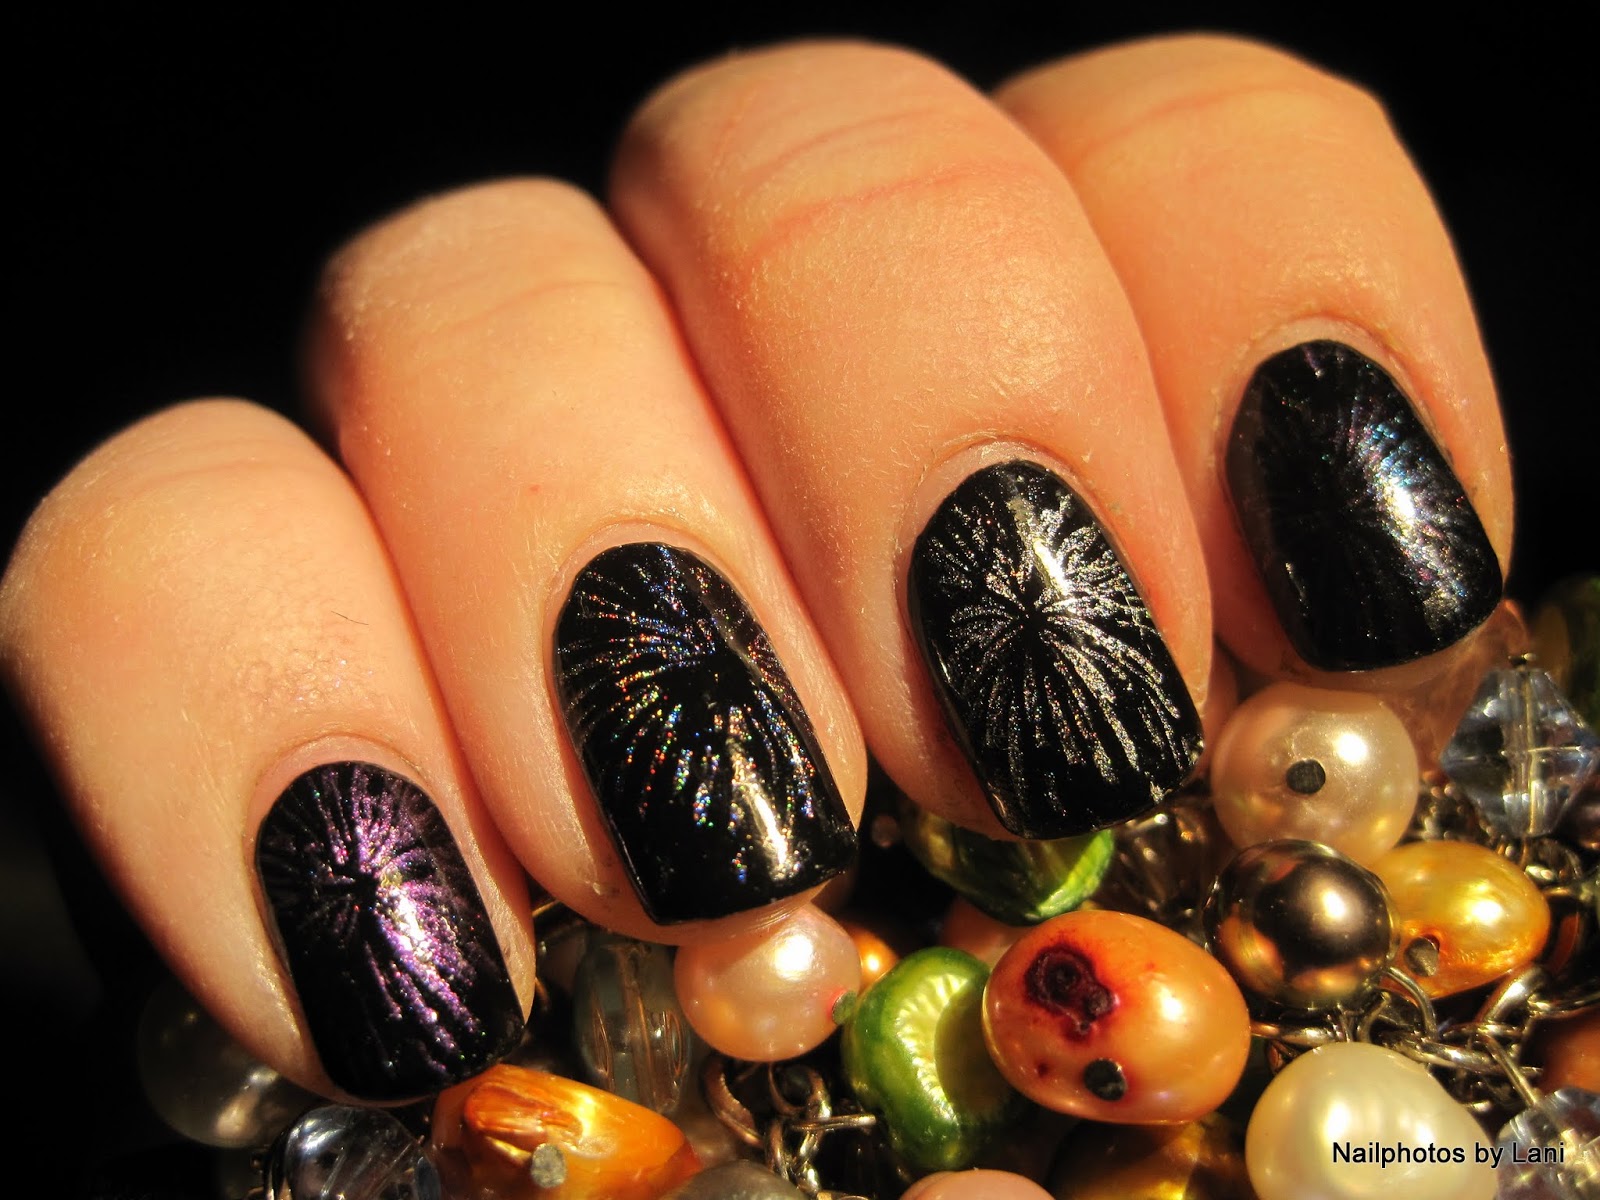 8. New Year's Eve Party Nails - wide 6